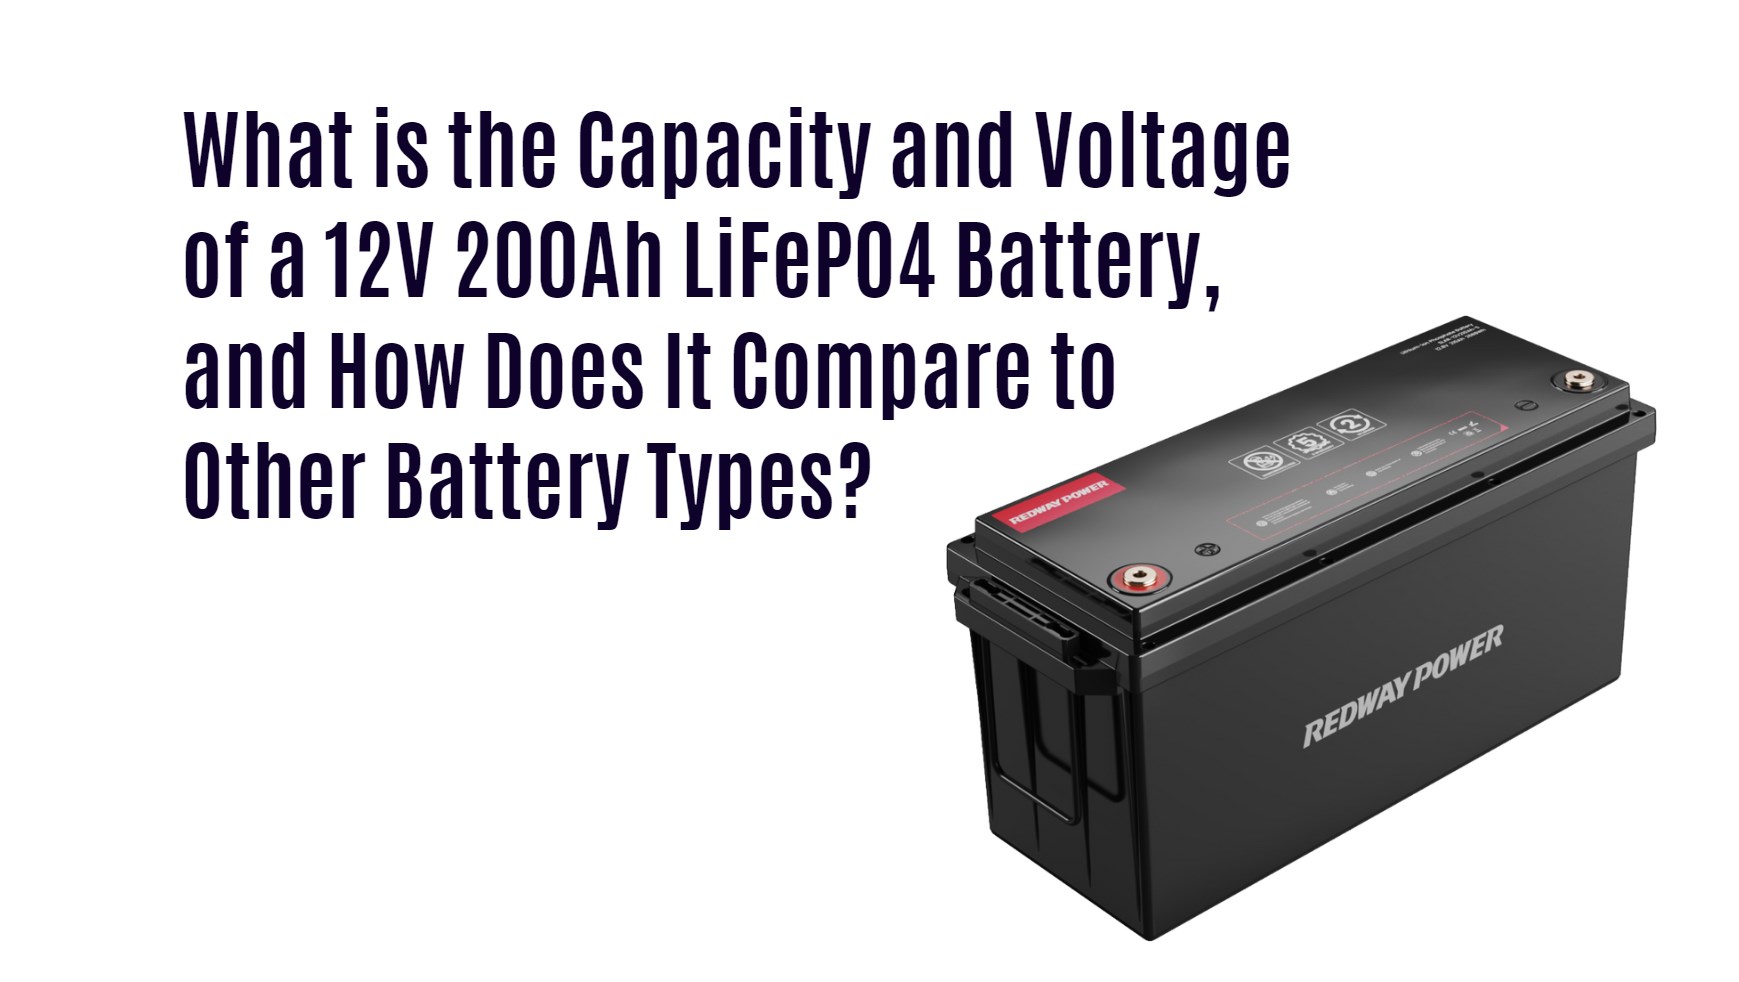 What is the Capacity and Voltage of a 12V 200Ah LiFePO4 Battery, and How Does It Compare to Other Battery Types?